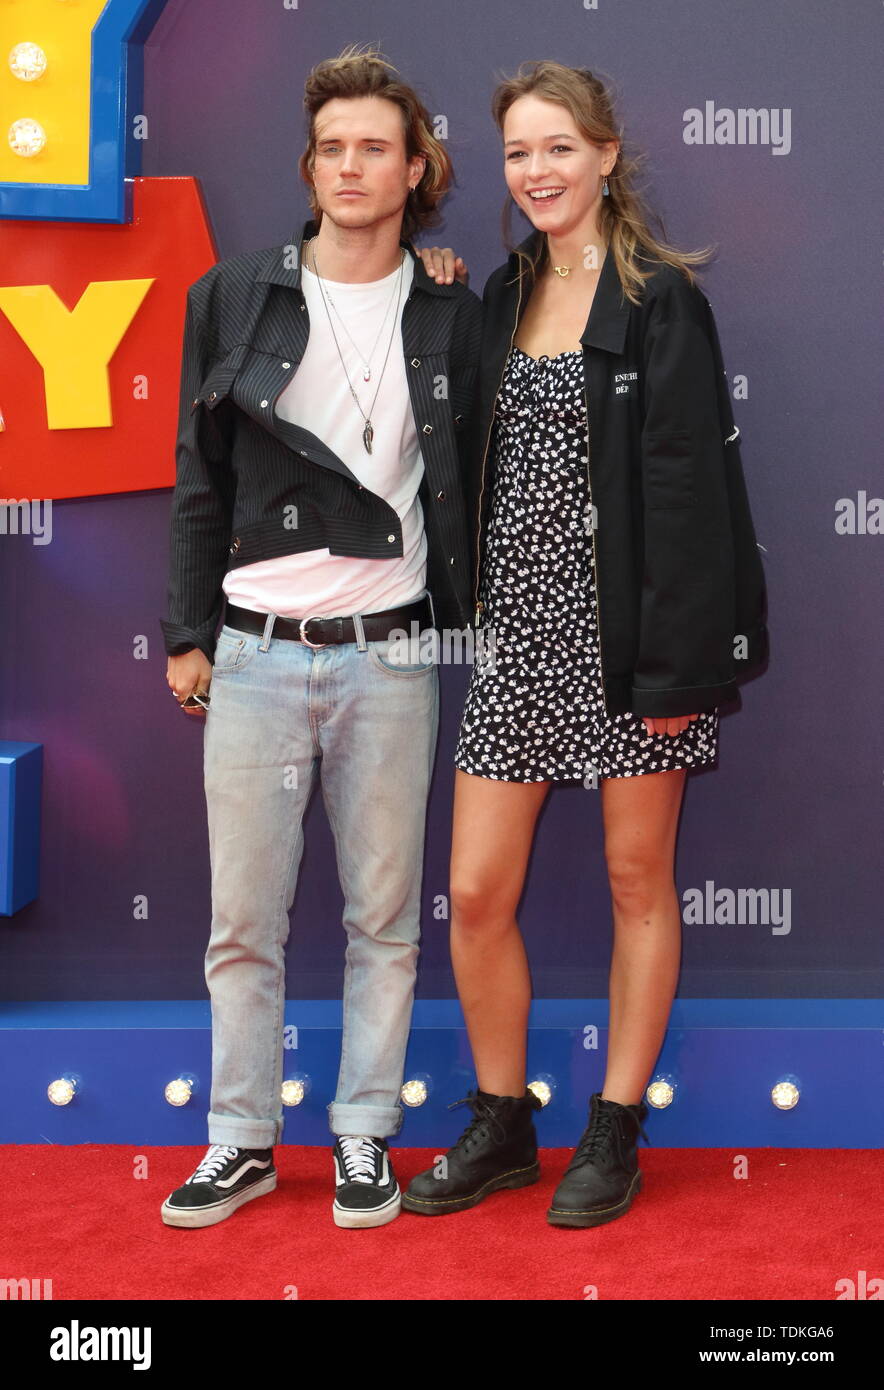 London, UK. 16th June, 2019. Dougie Poynter and Maddy Elmer attend the European Premiere of Toy Story 4 at Odeon Luxe, Leicester Square in London. Credit: SOPA Images Limited/Alamy Live News Stock Photo